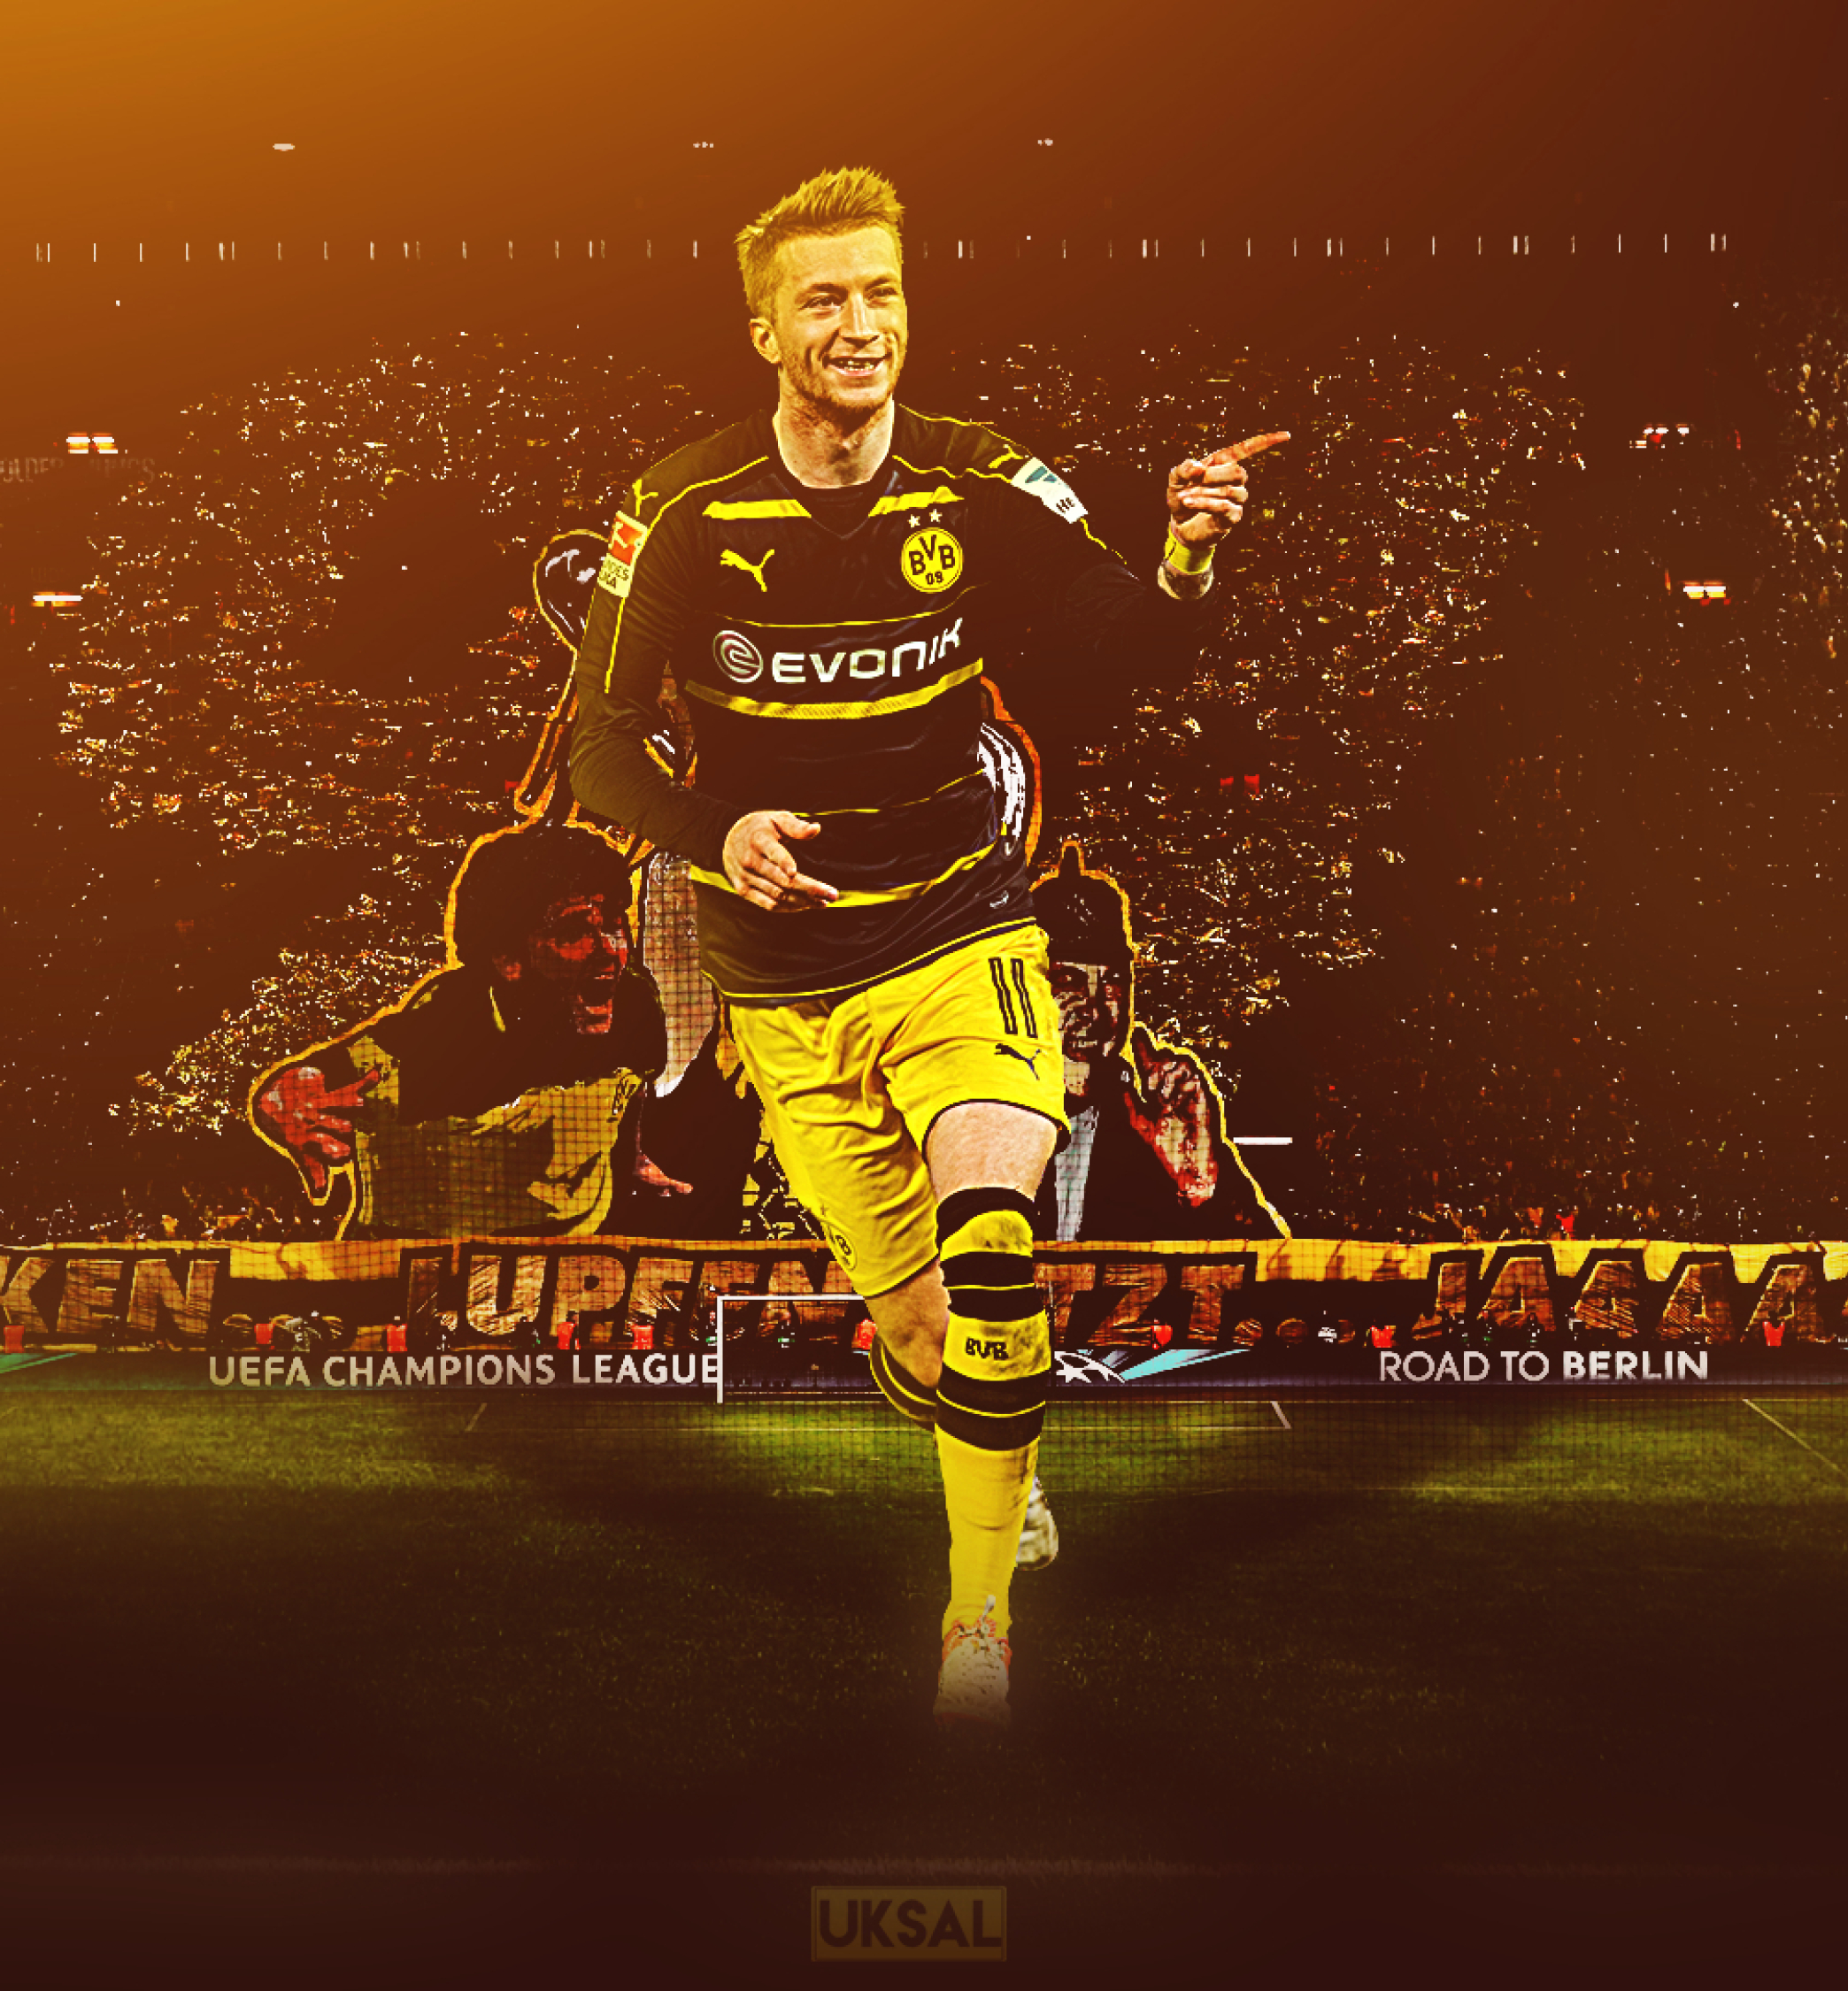 x2250 Marco Reus Cool Borussia Dortmund x2250 Resolution Wallpaper Hd Sports 4k Wallpapers Images Photos And Background Wallpapers Den